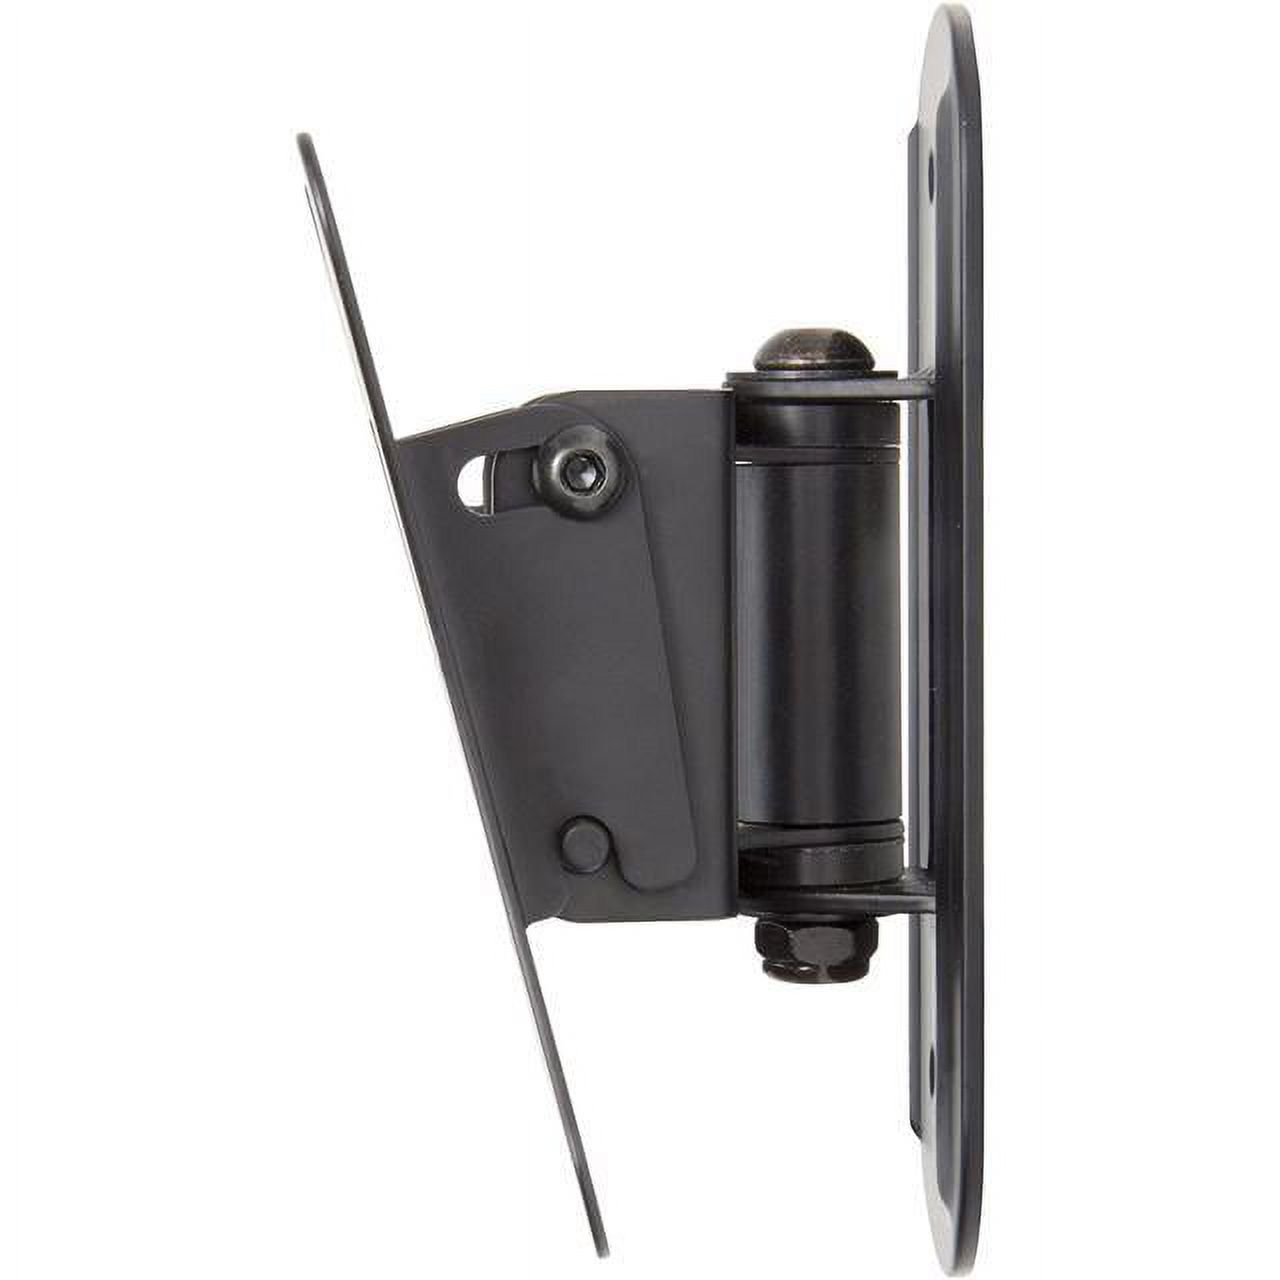 AVF MRL12-A  Monitor or TV Wall Mount, Tilt and Turn for 13-inch to 27-inch Screens, Black - image 3 of 3